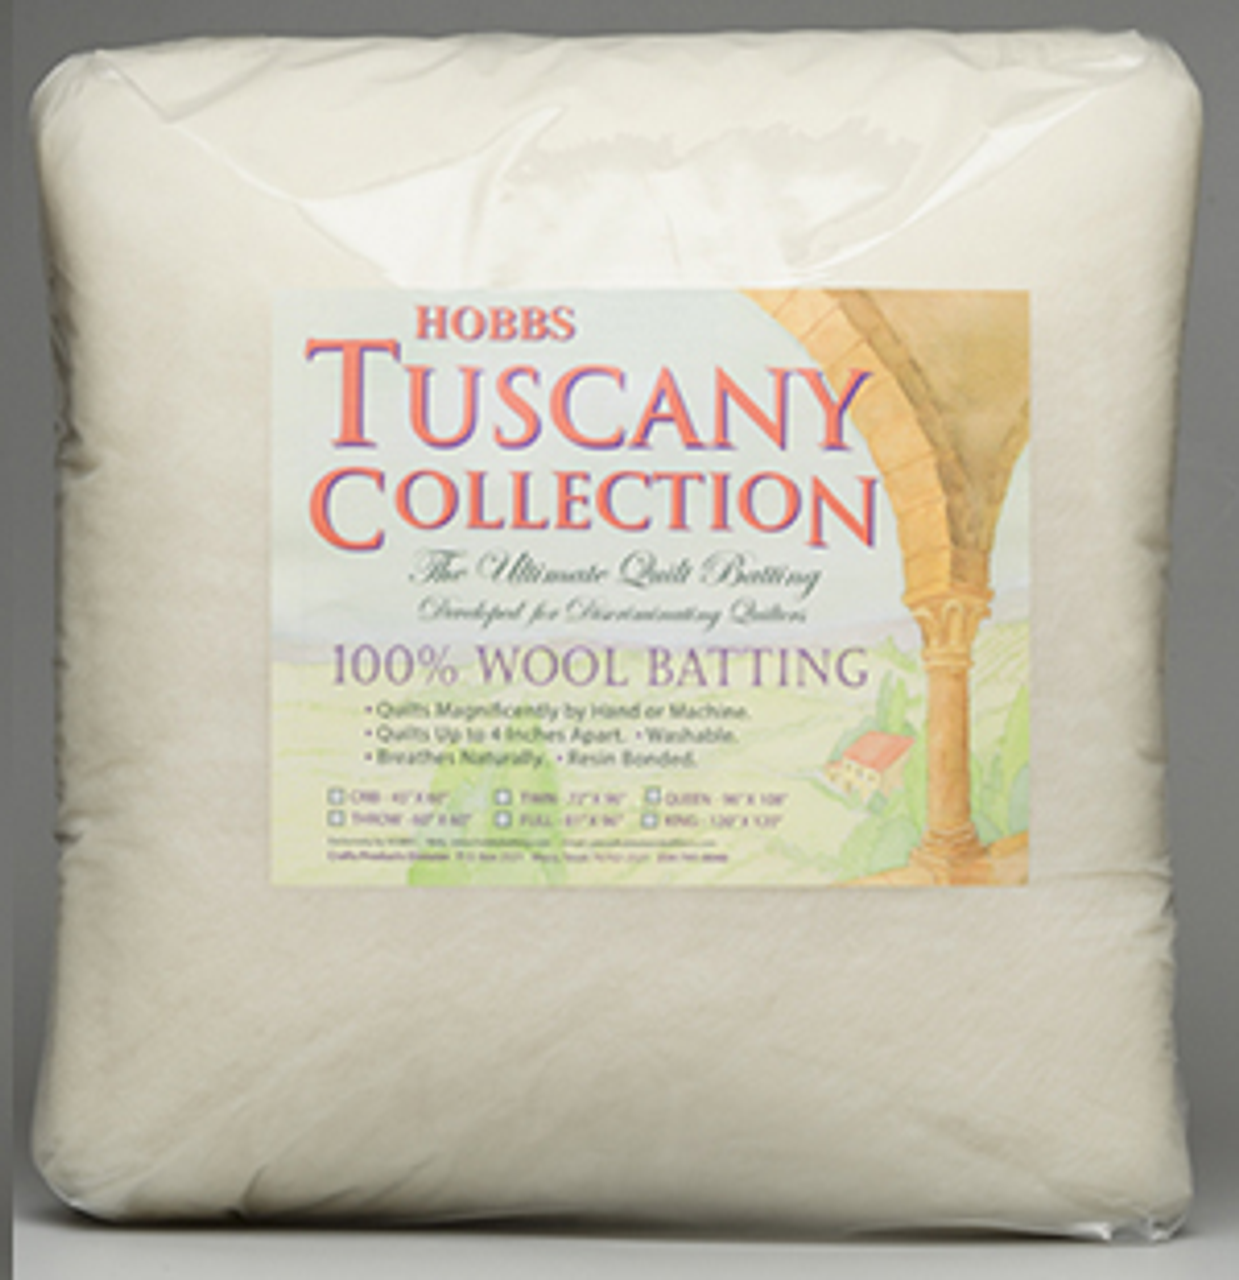 Warm and Natural Cotton Batting - Twin Size 72-inch x 90-inch